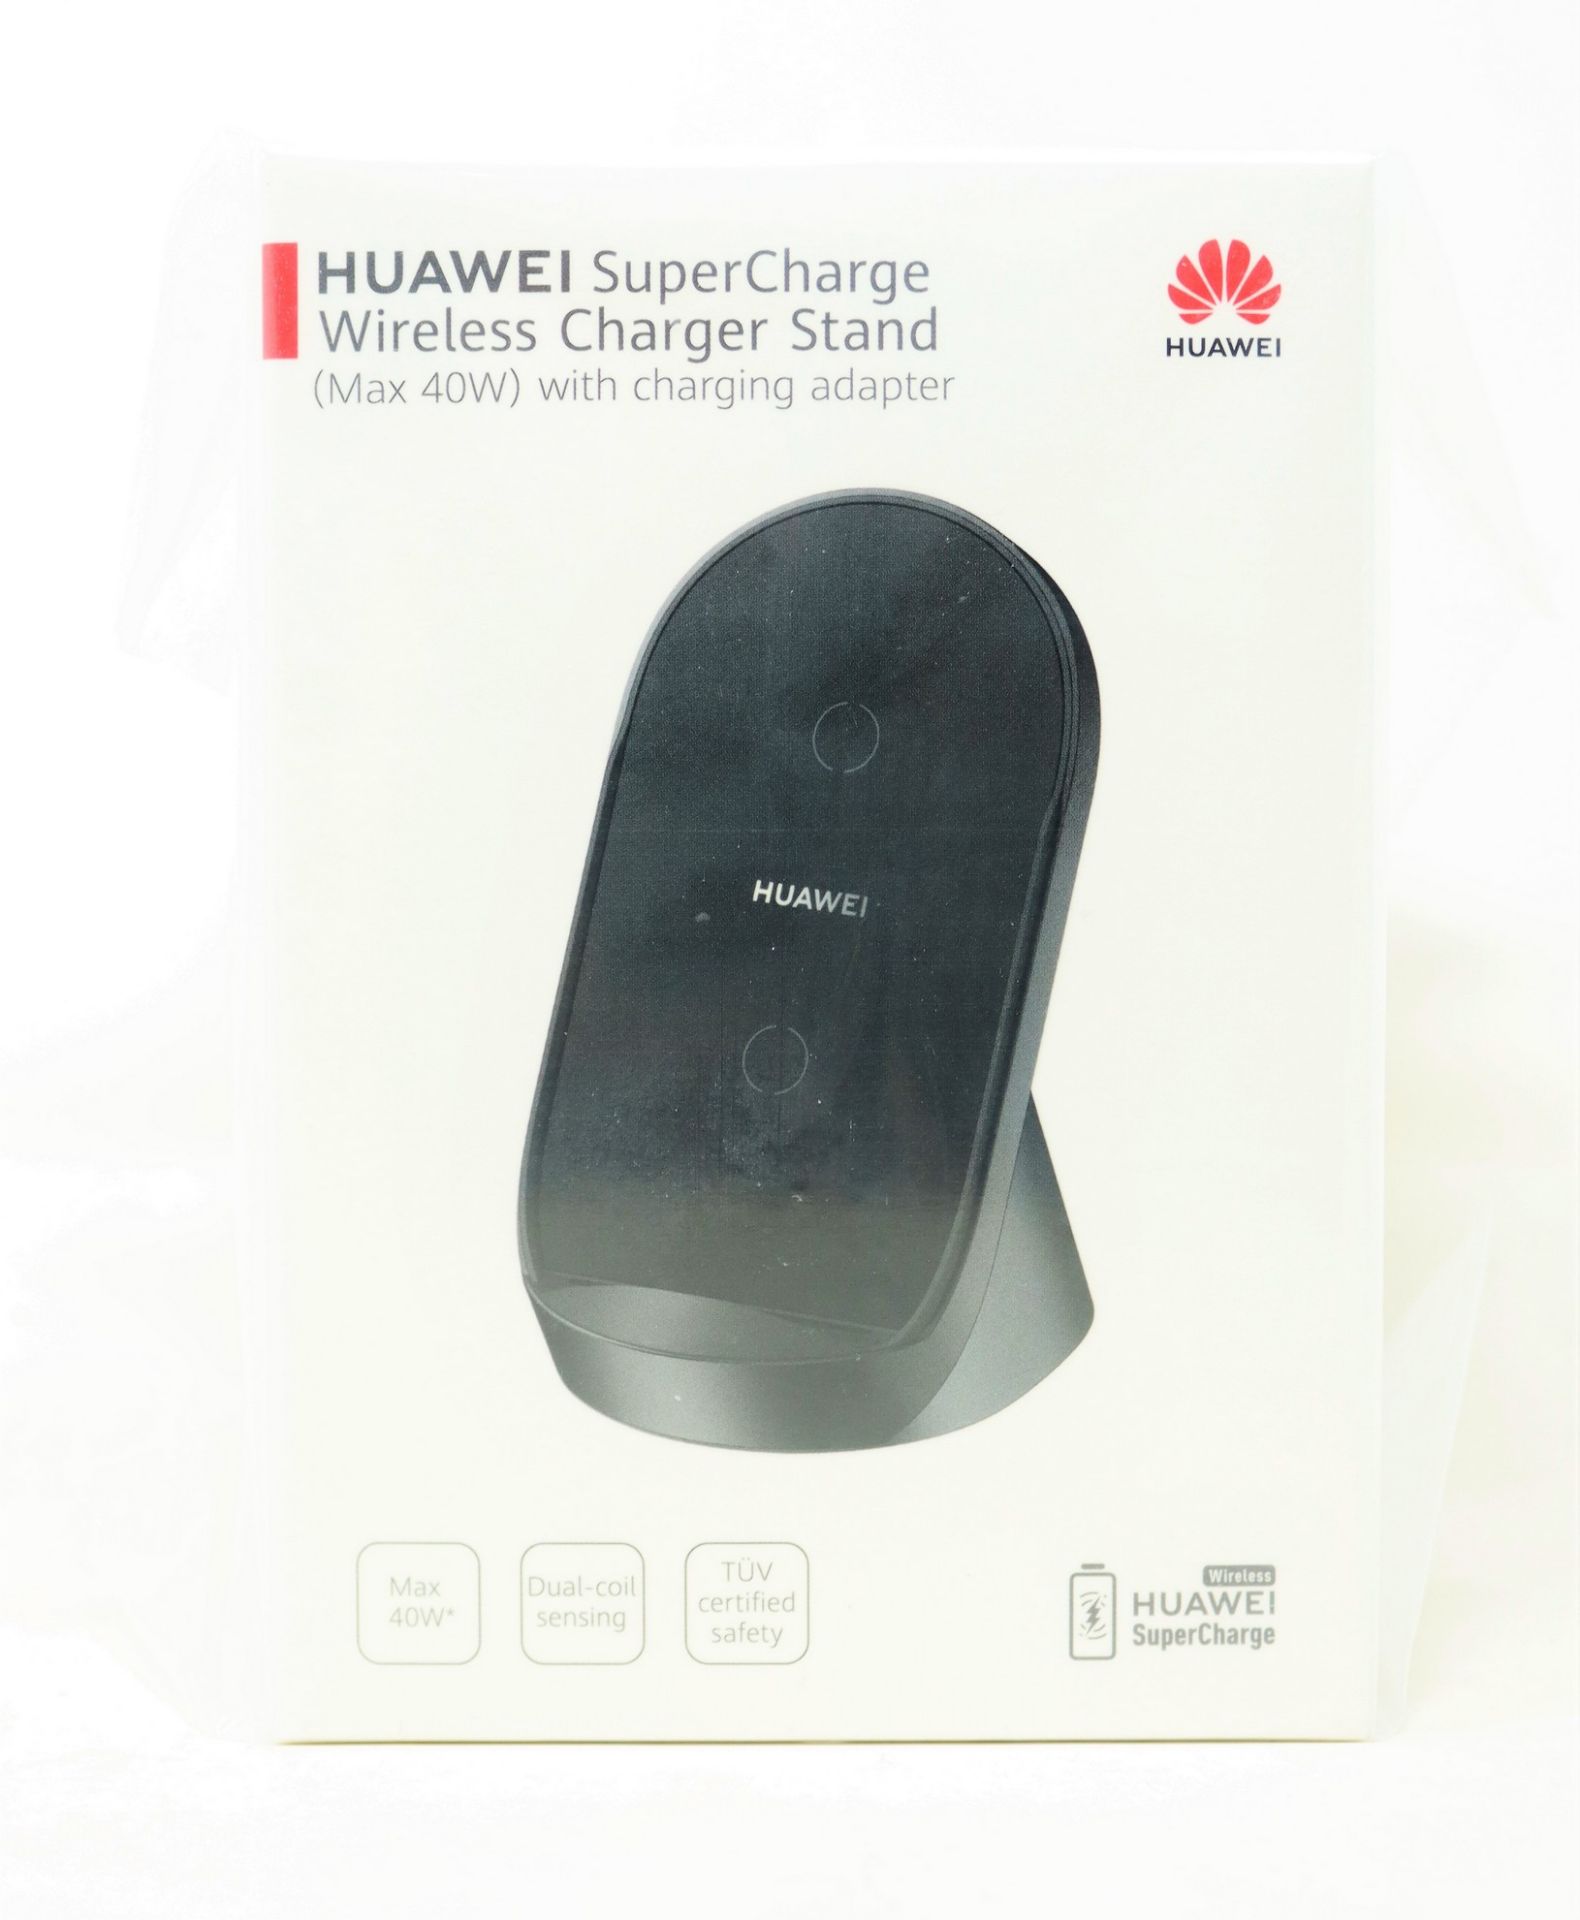 A boxed as new Huawei SuperCharge 40W Wireless Charger Stand in Black (P/N: CP62) (EU two pin plug